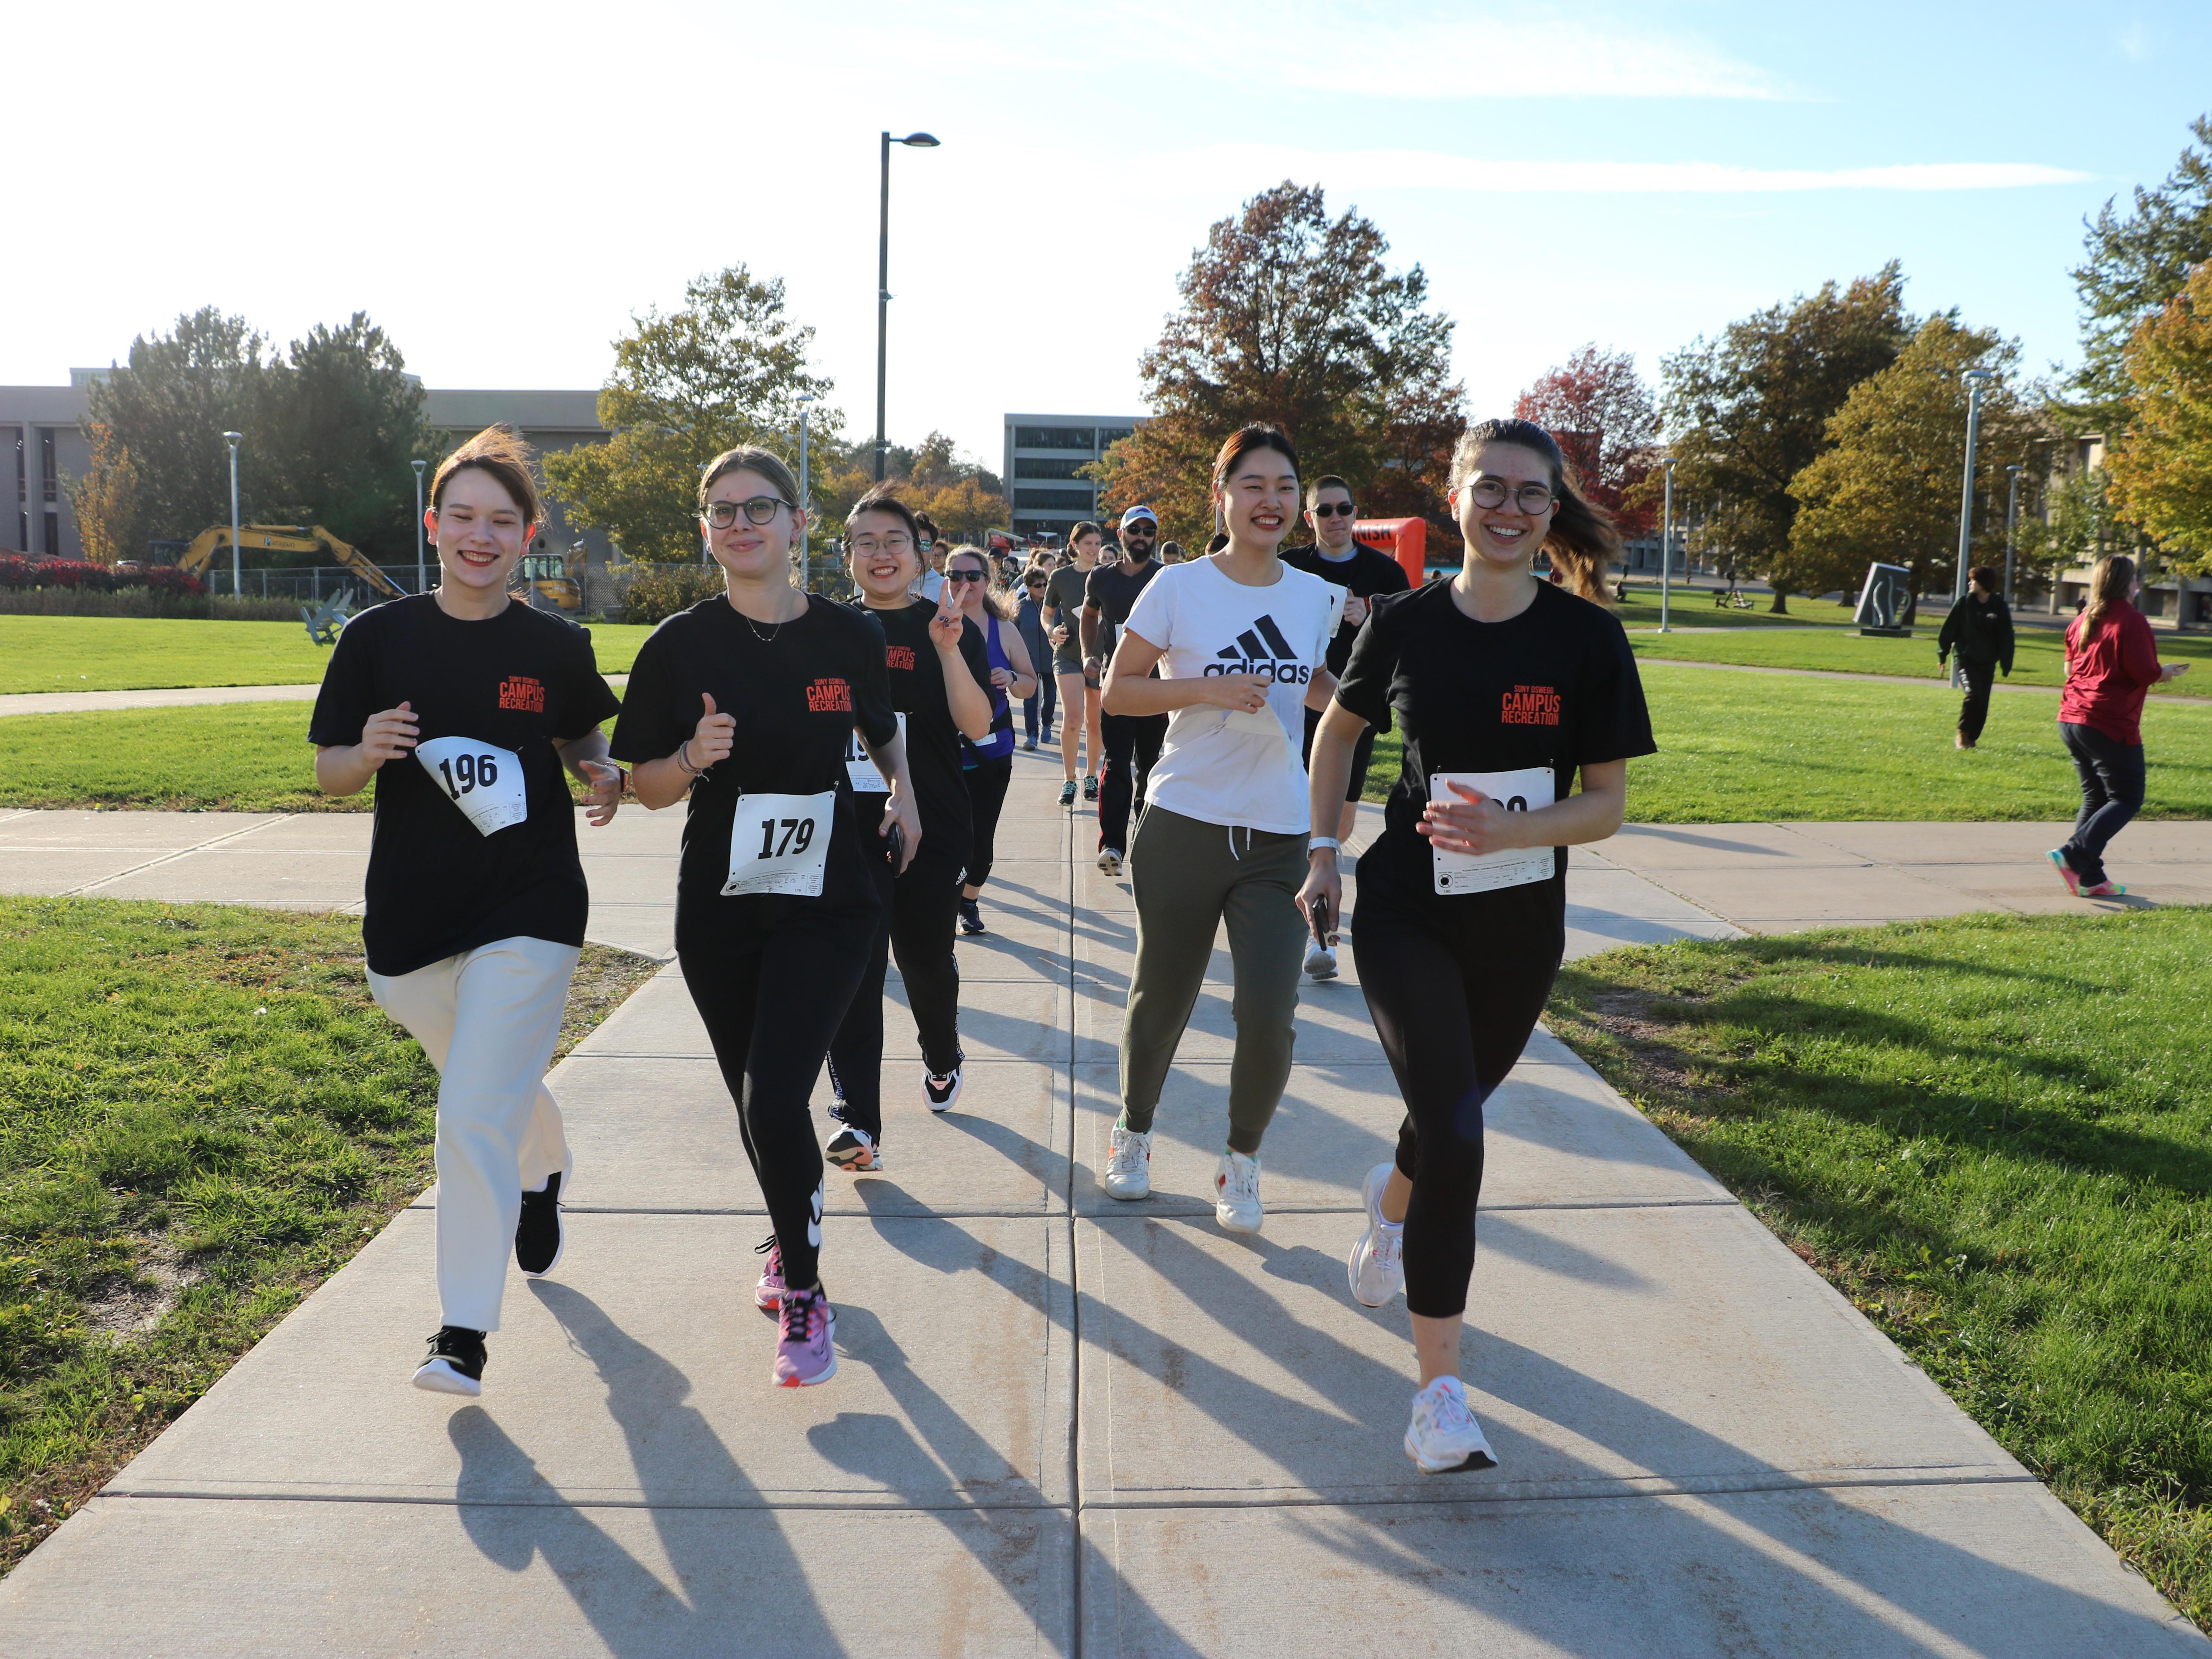 Students take part in the Great Pumpkin Run, part of the menu of Family and Friends Weekend activities Oct. 20 to 22